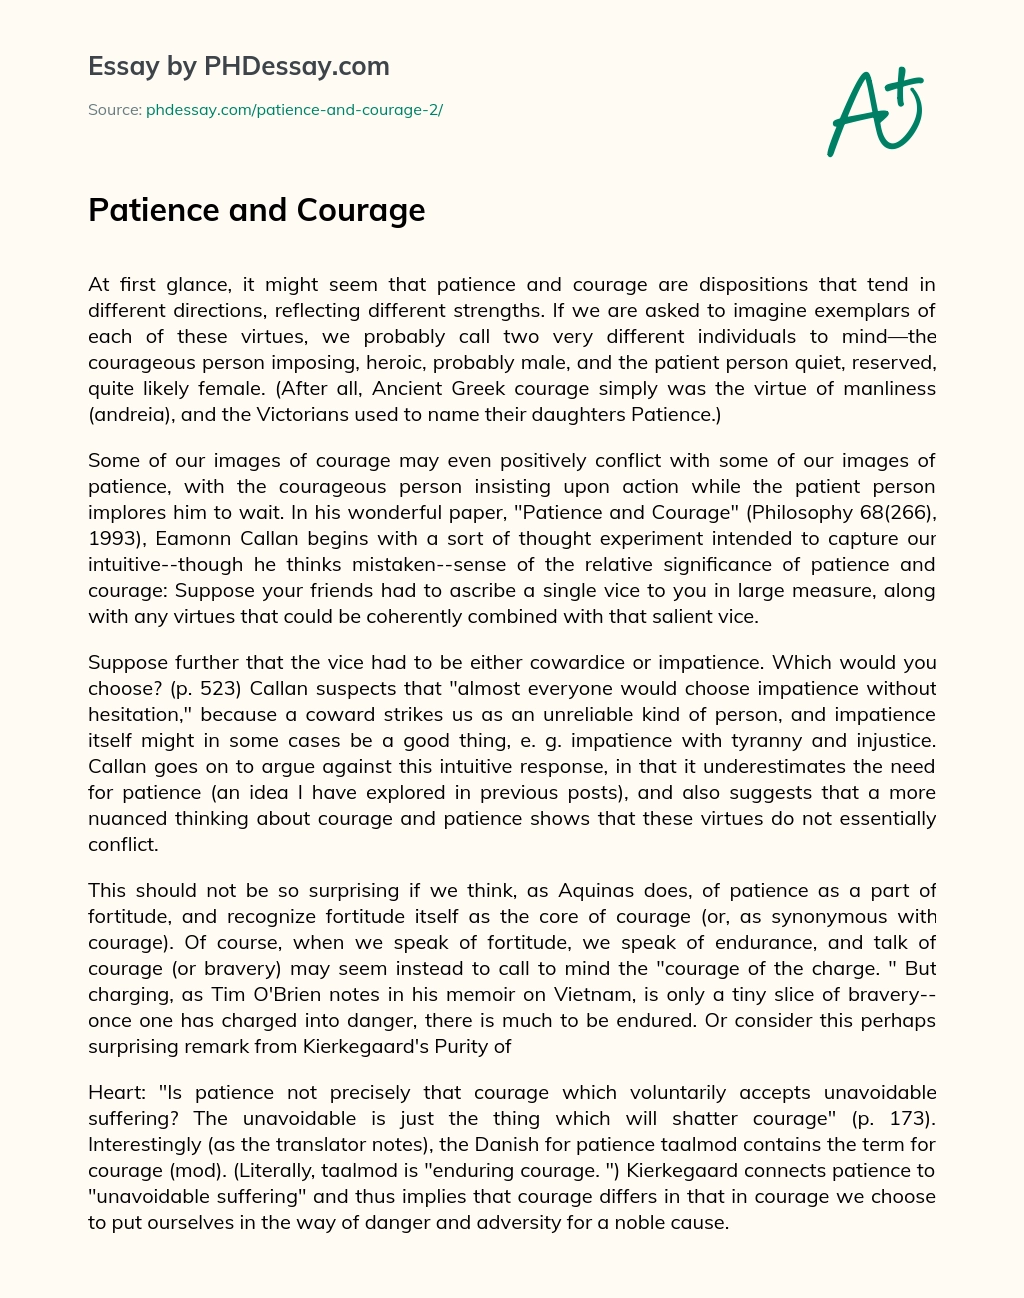 ﻿Patience and Courage essay